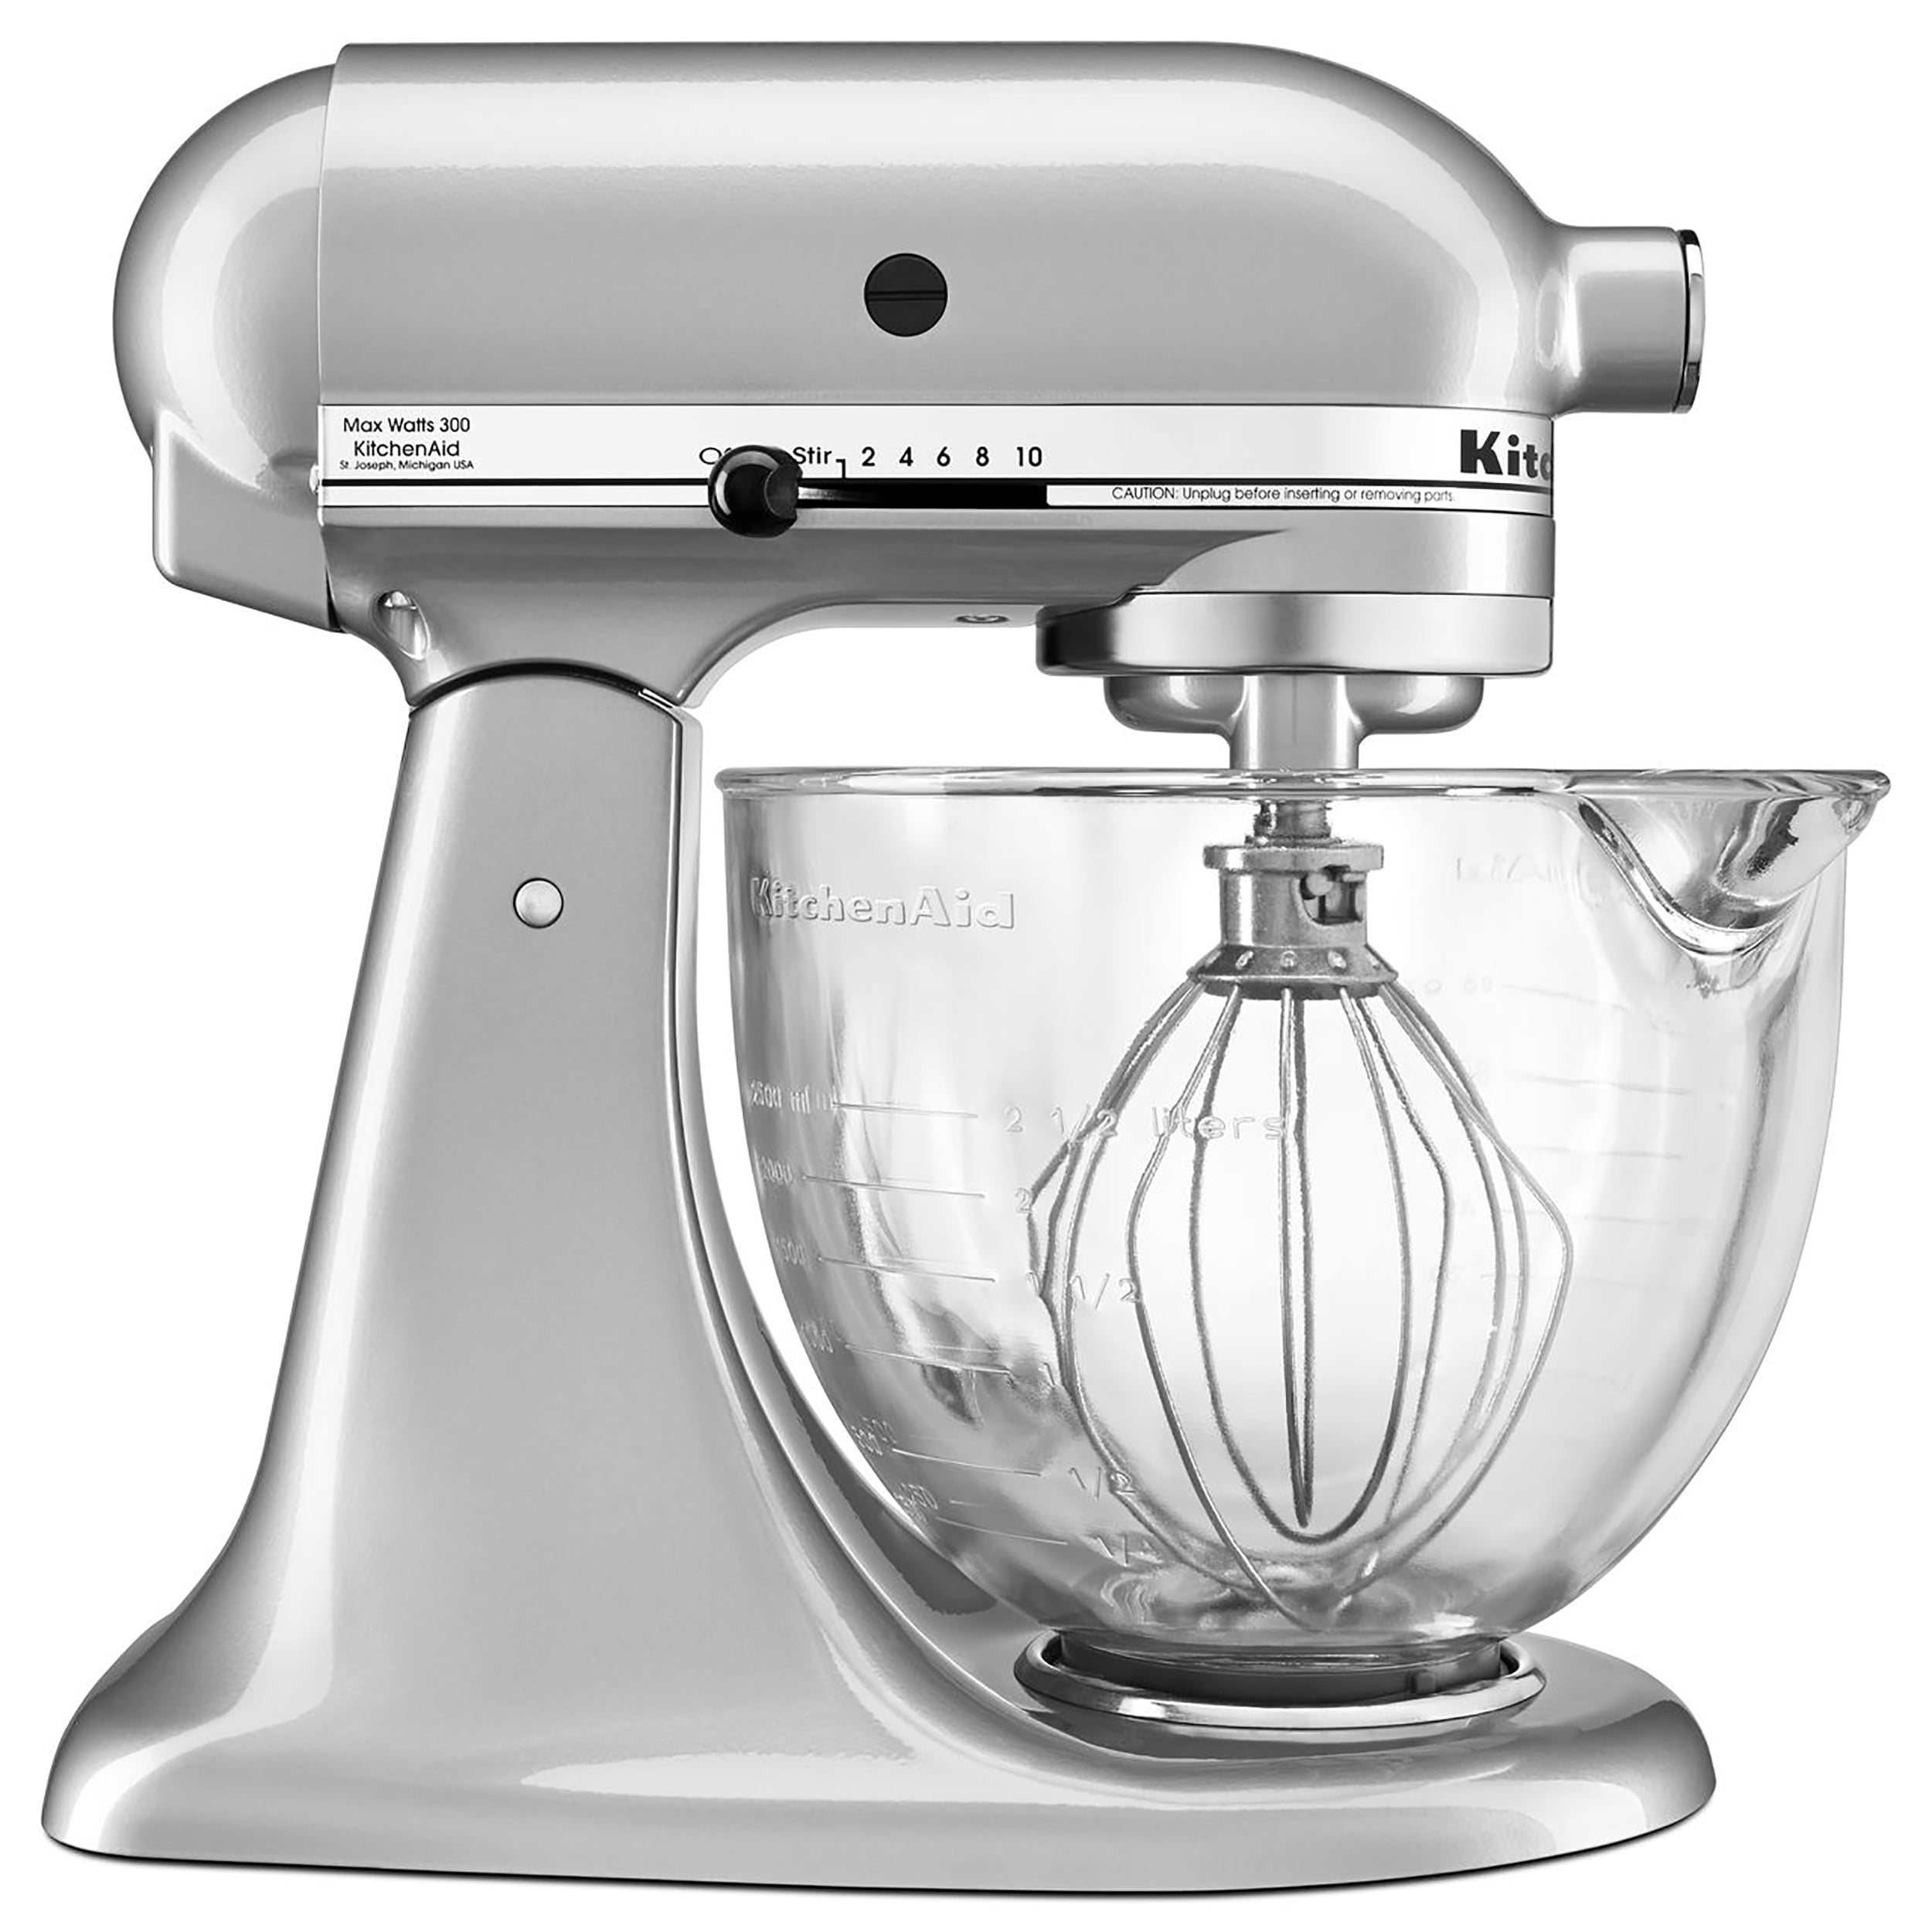 InnoMoon Glass Bread Bowl with Baking Lid for Kitchenaid Stand Mixer, Glass  Mixer Bowl Competible with Kitchenaid 4.5-5Qt Tilt-Head Stand Mixer, Oven